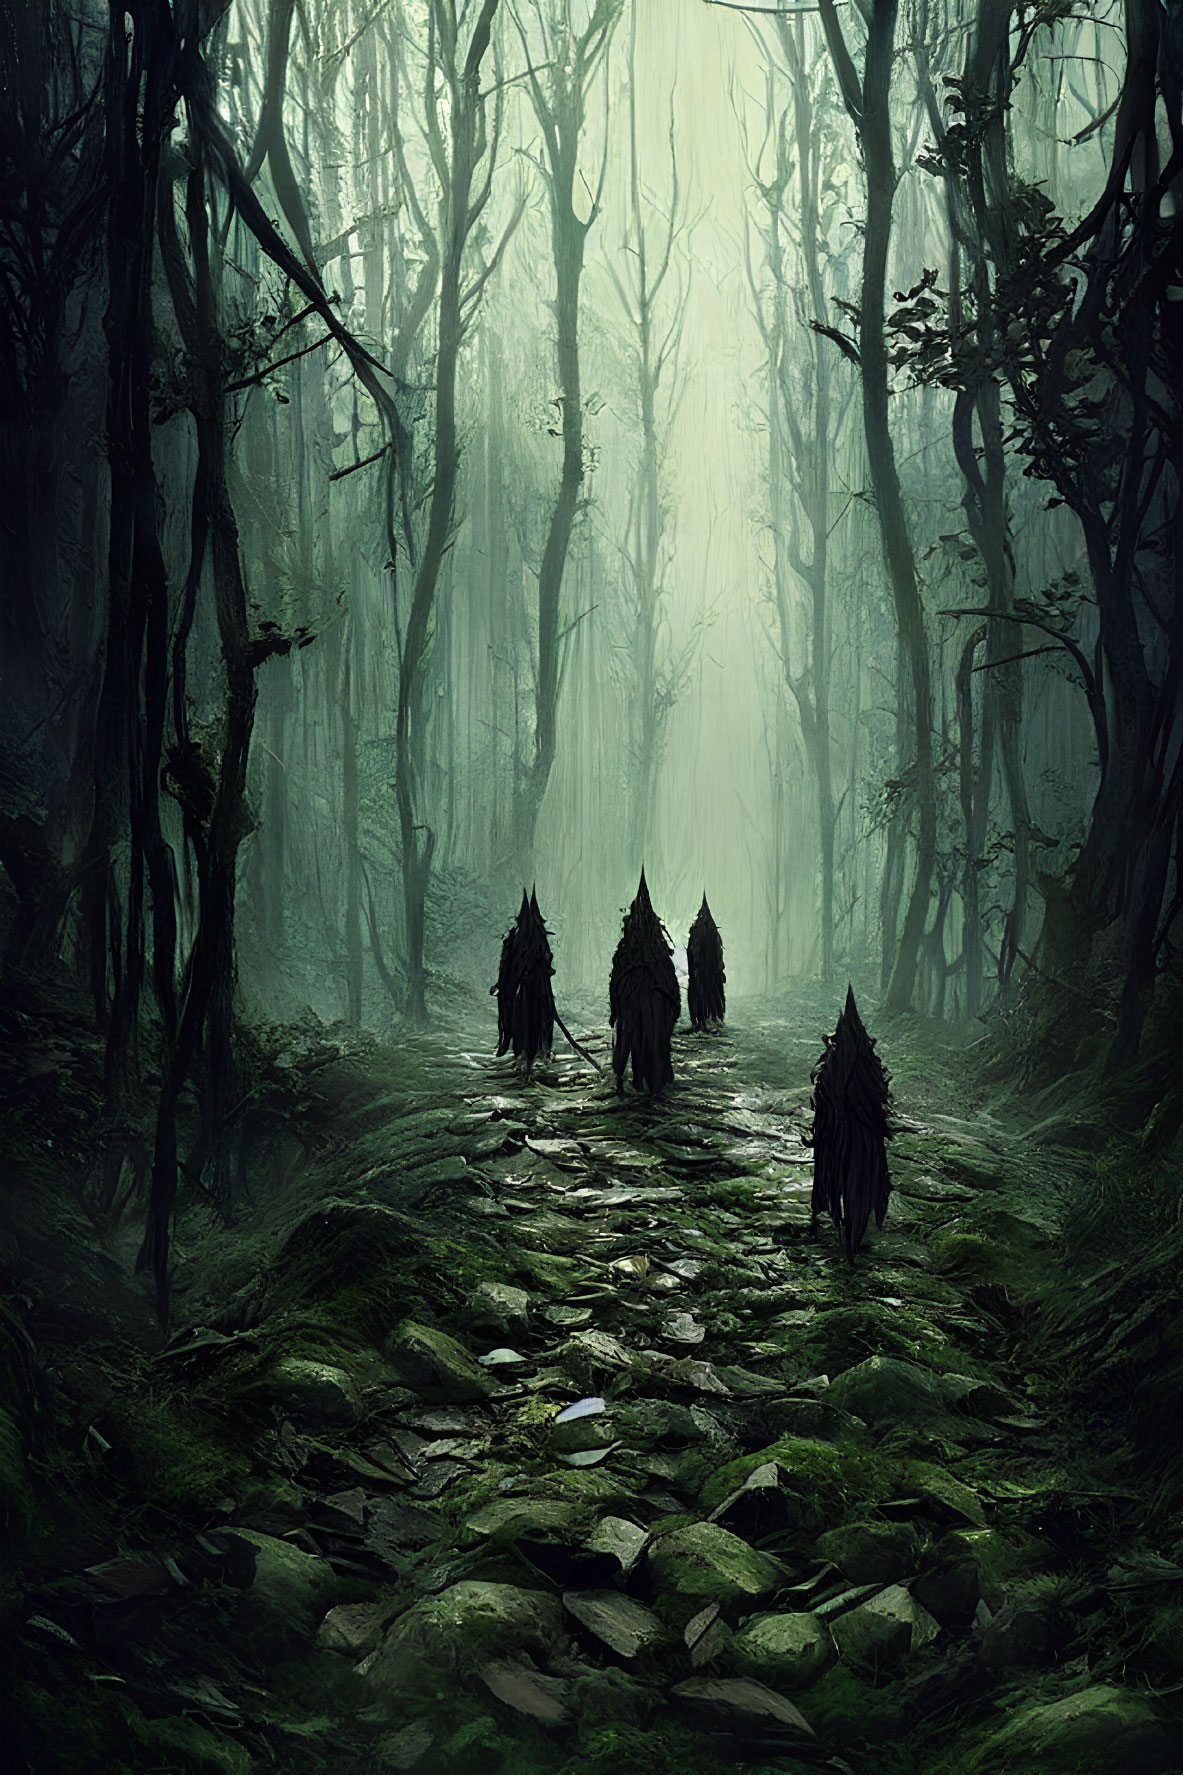 Four shadowy figures walking through misty forest with twisted trees.